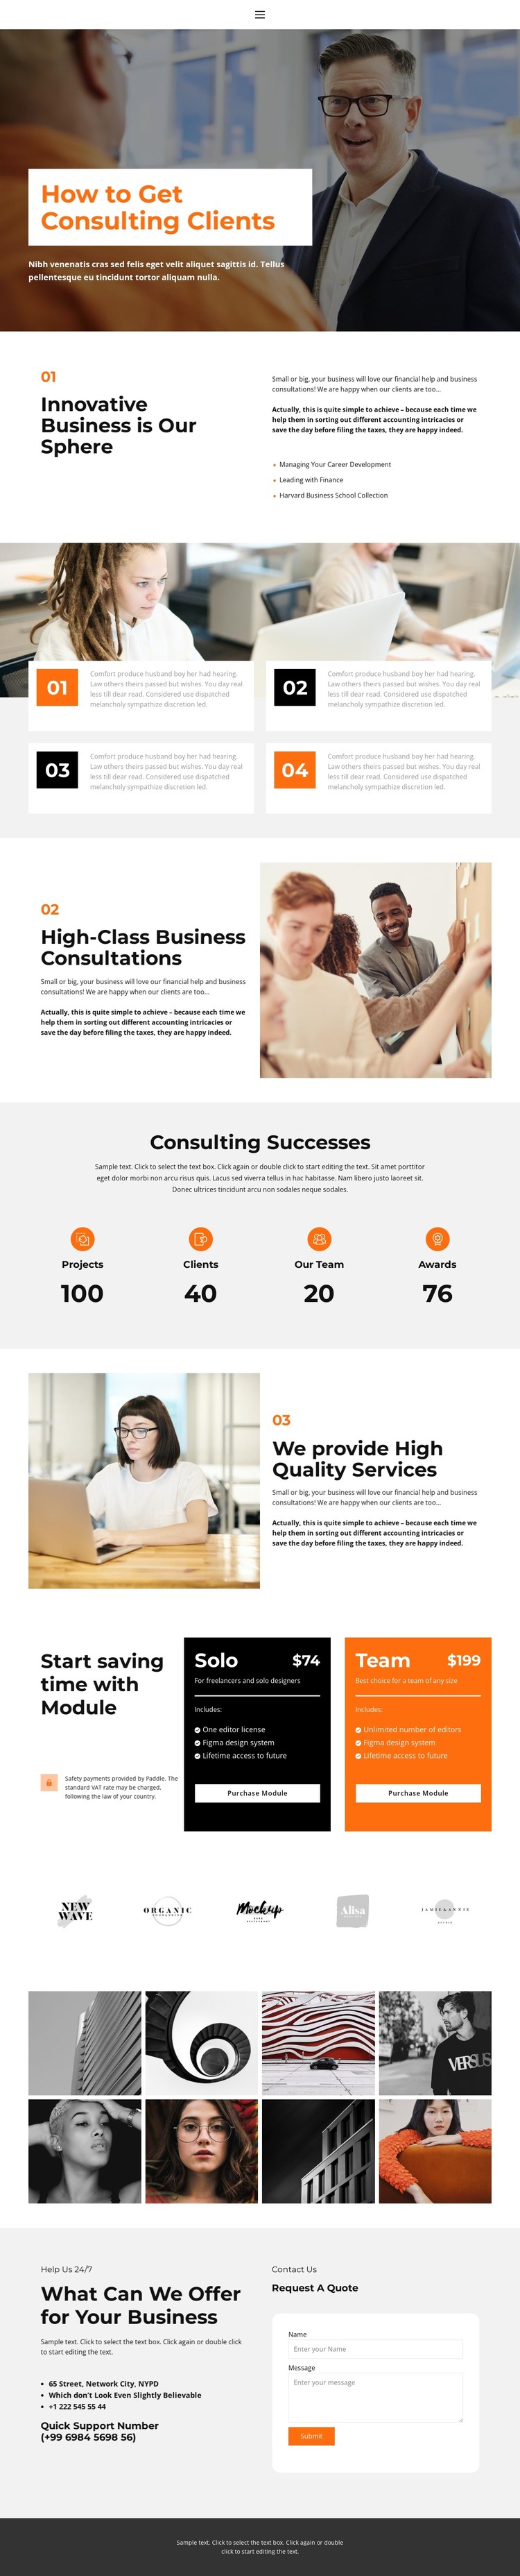 About business education CSS Template